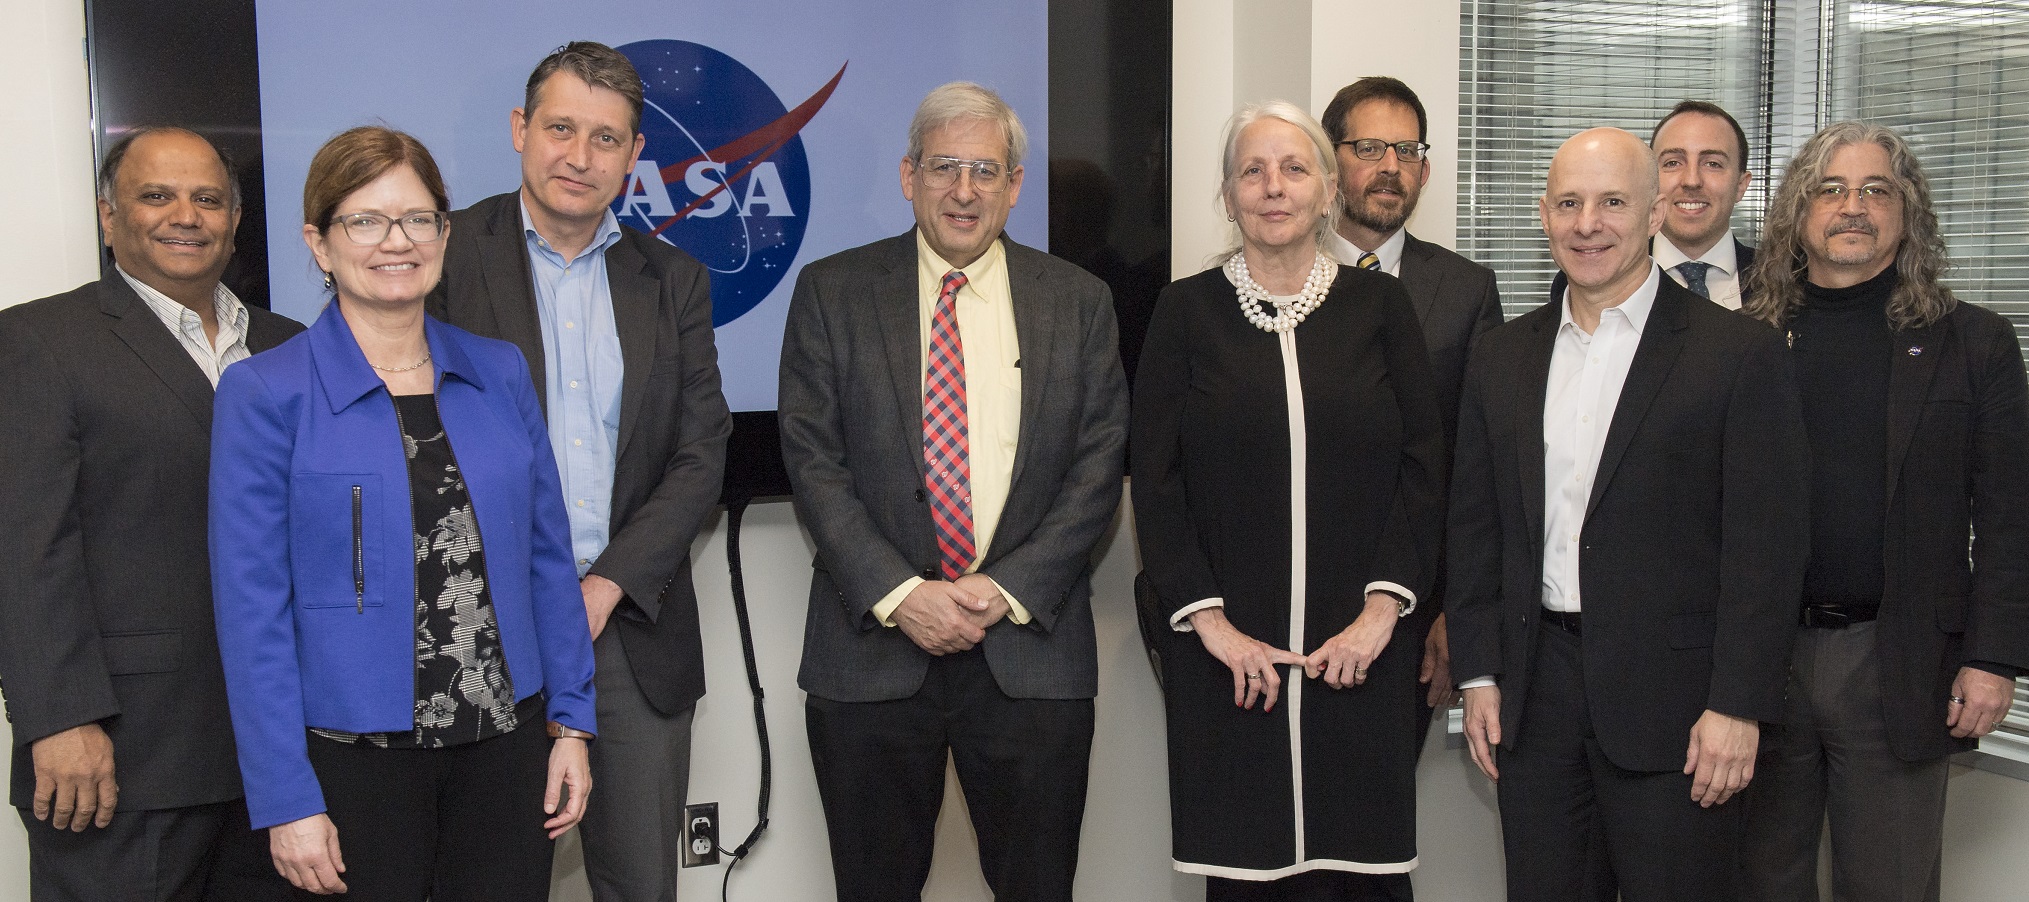 NASA and the University of Twente, located in Enschede, Netherlands, kicked off a new cooperative agreement April 18.